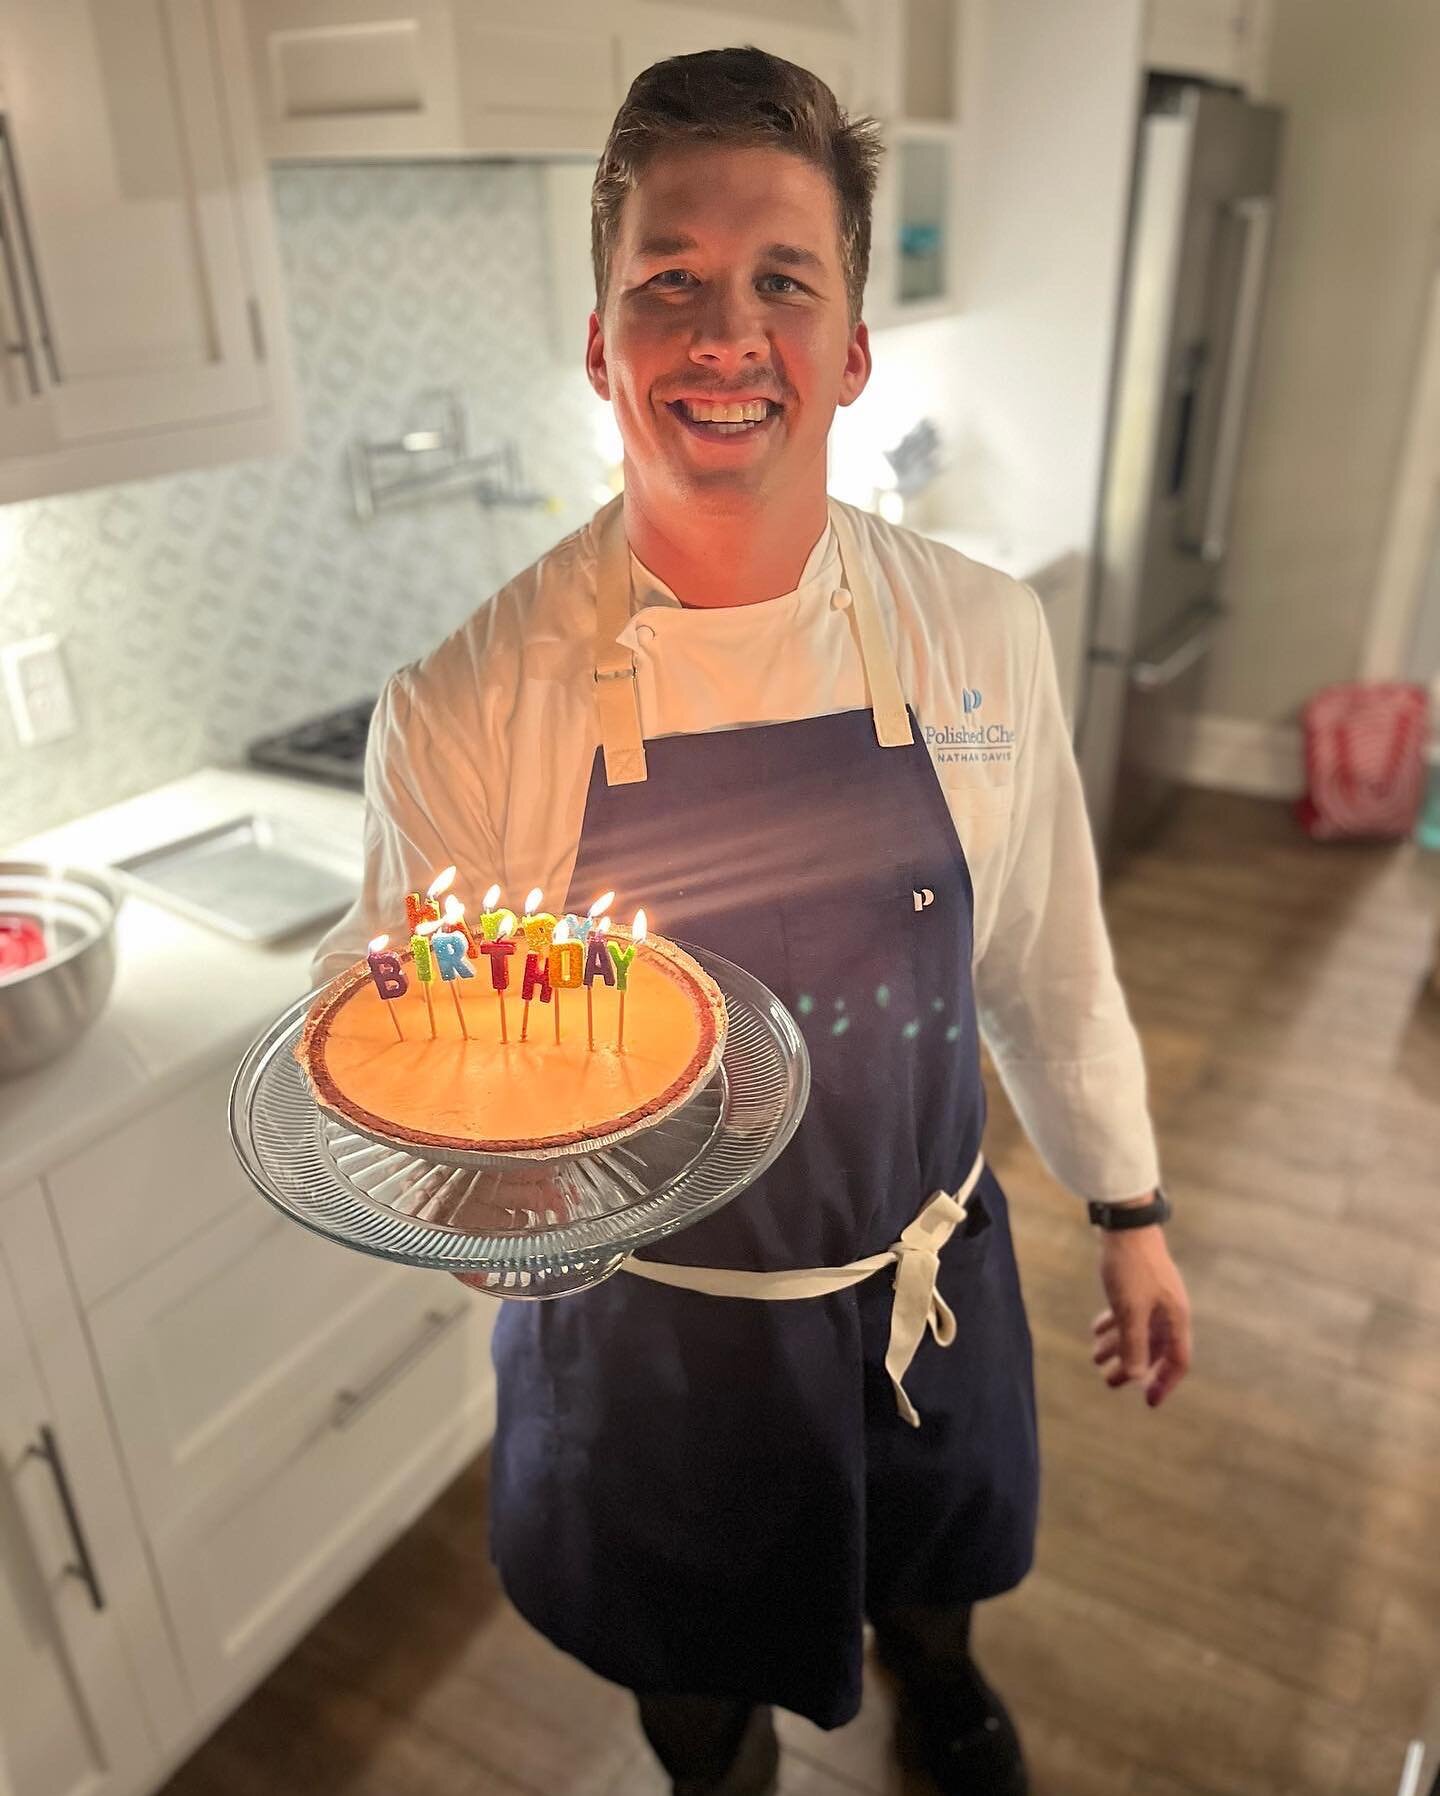 Chef Nathan celebrated a birthday in Rosemary Beach with a 4 course vegan dinner. All made from scratch in the privacy of your home. Pan seared chick pea crab cake &amp; butternut squash soubise, roasted &amp; candied beet salad w/ white balsamic gla